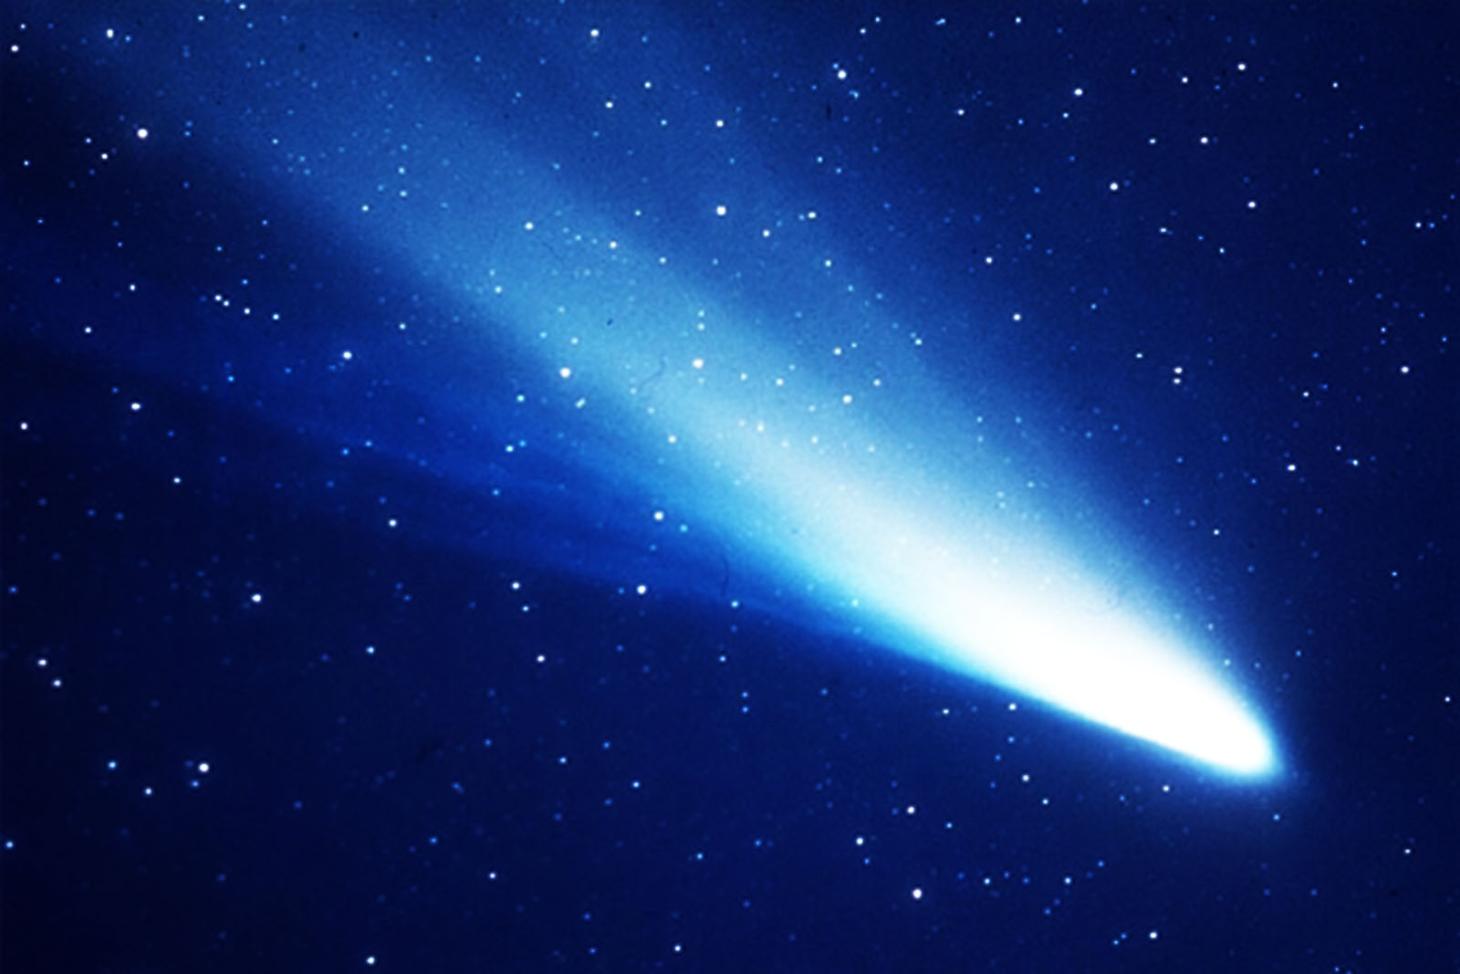 What are the Dangers and Risks Associated with Comets and How Can We Protect Ourselves?